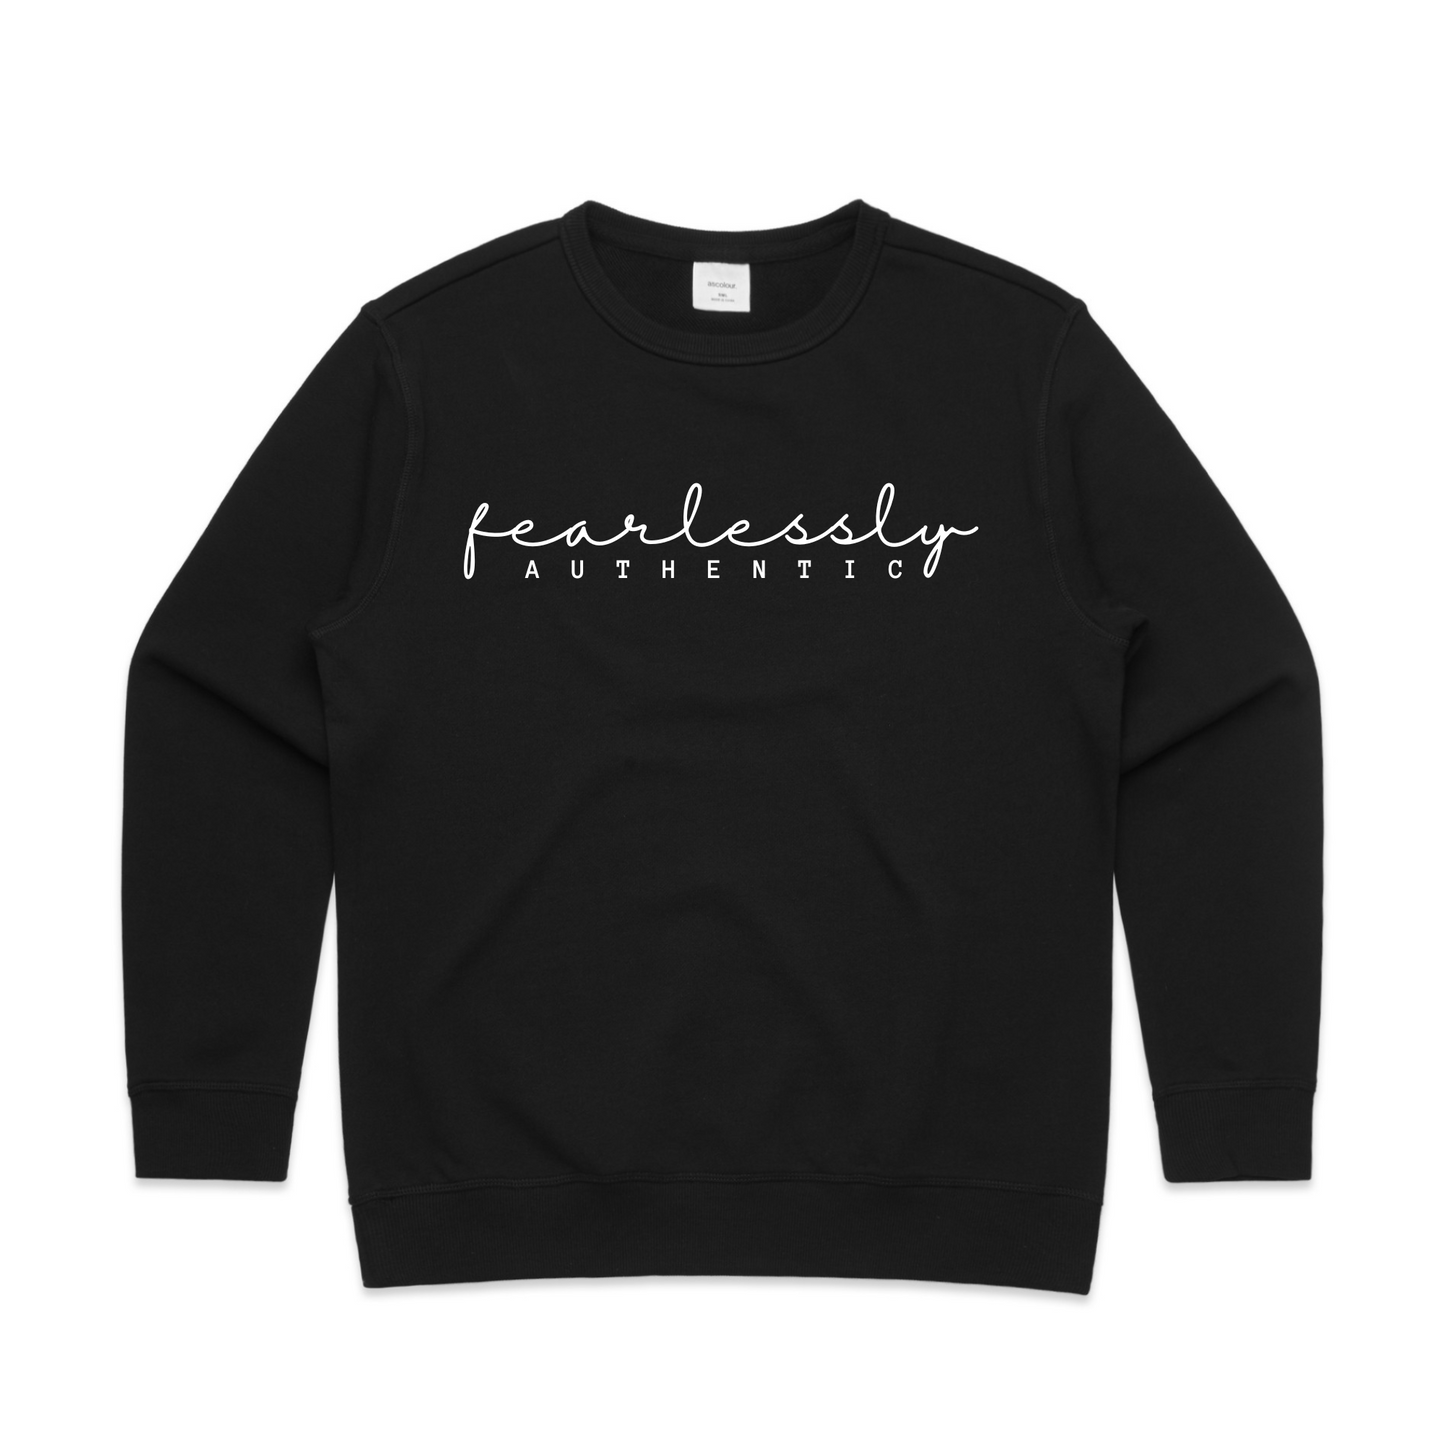 Fearlessly Authentic in white text on a black crew neck jumper